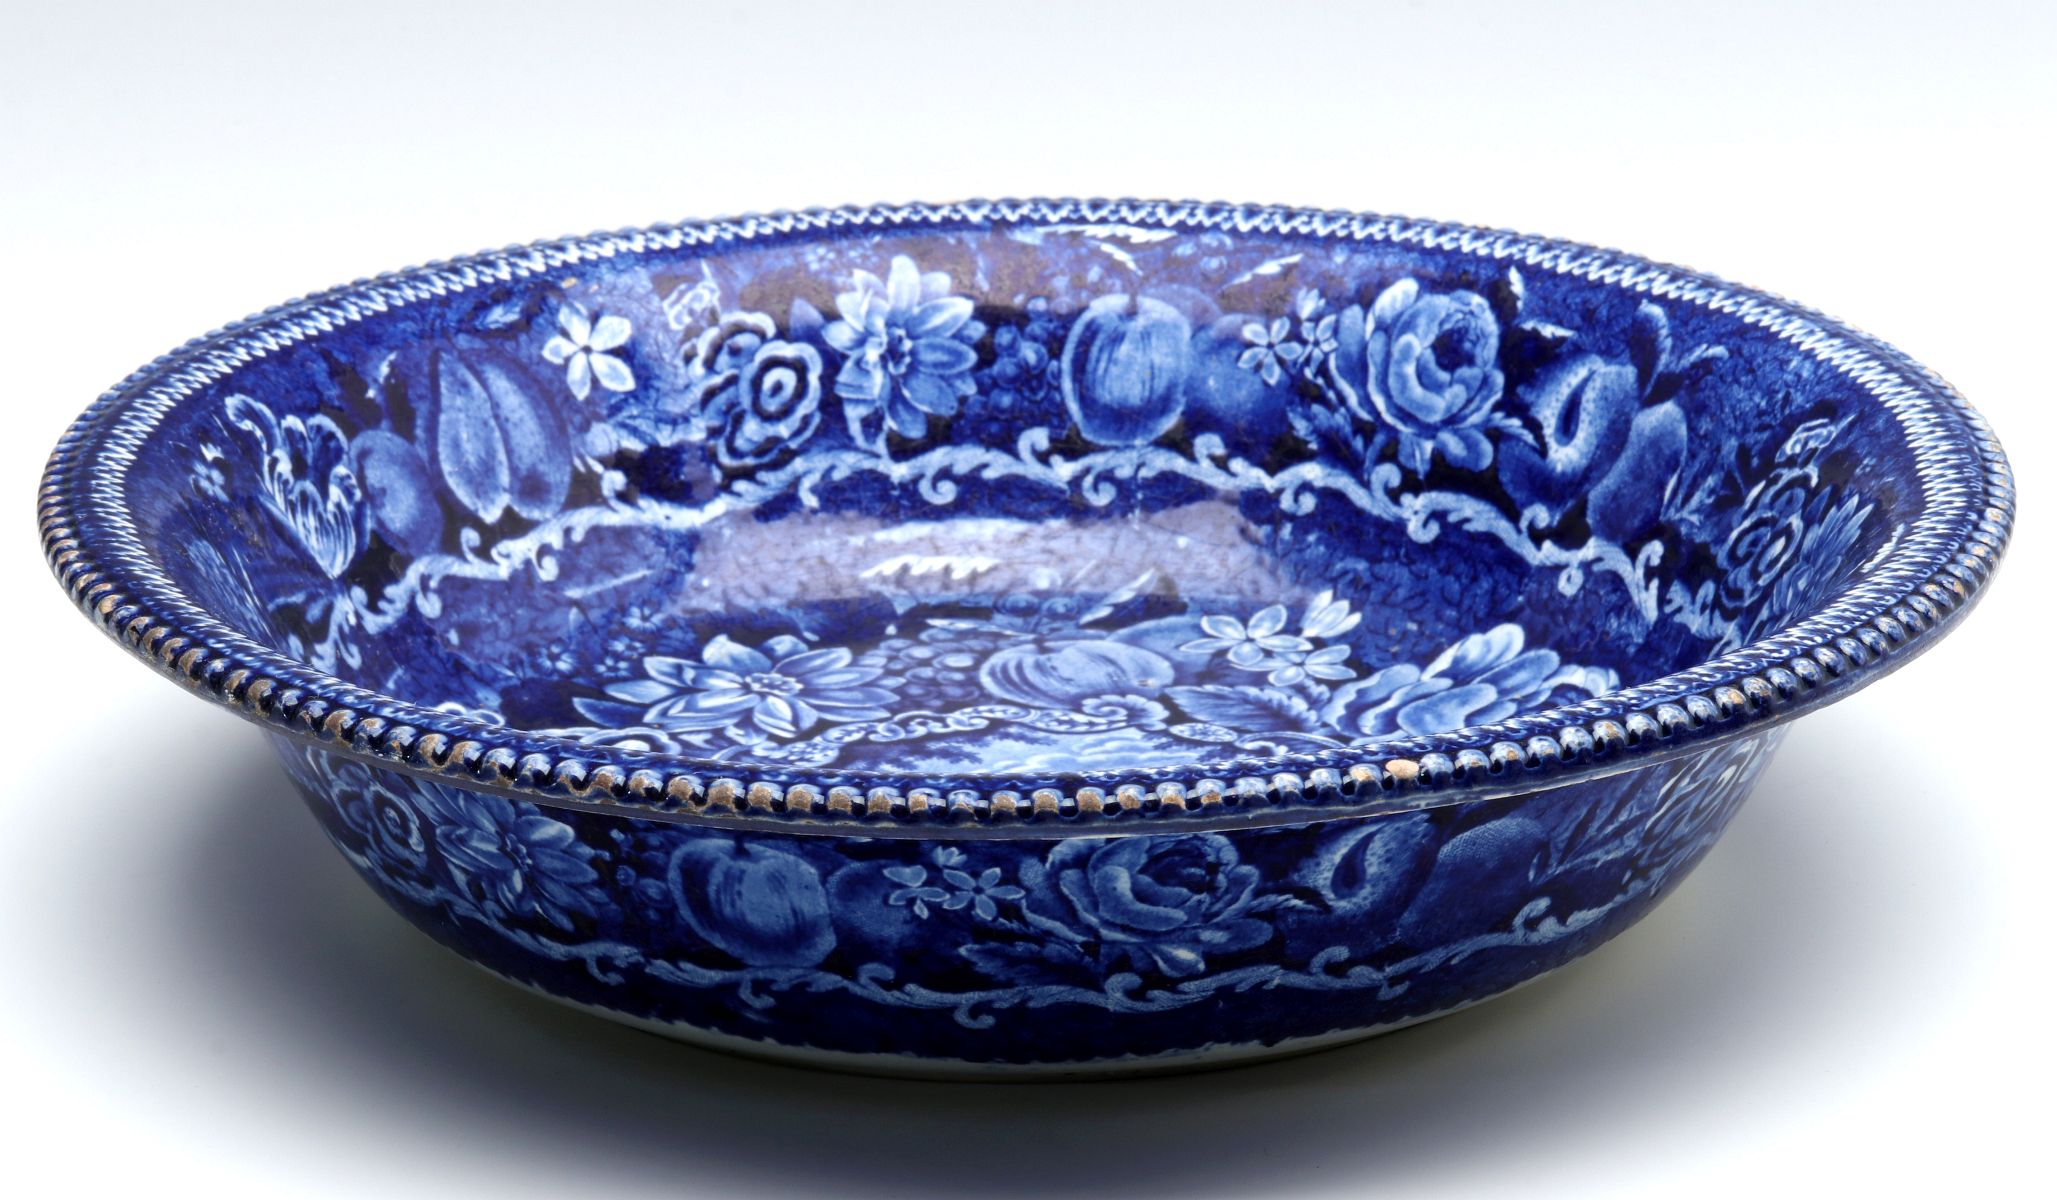 HISTORICAL STAFFORDSHIRE 'WARLEIGH HOUSE' BOWL